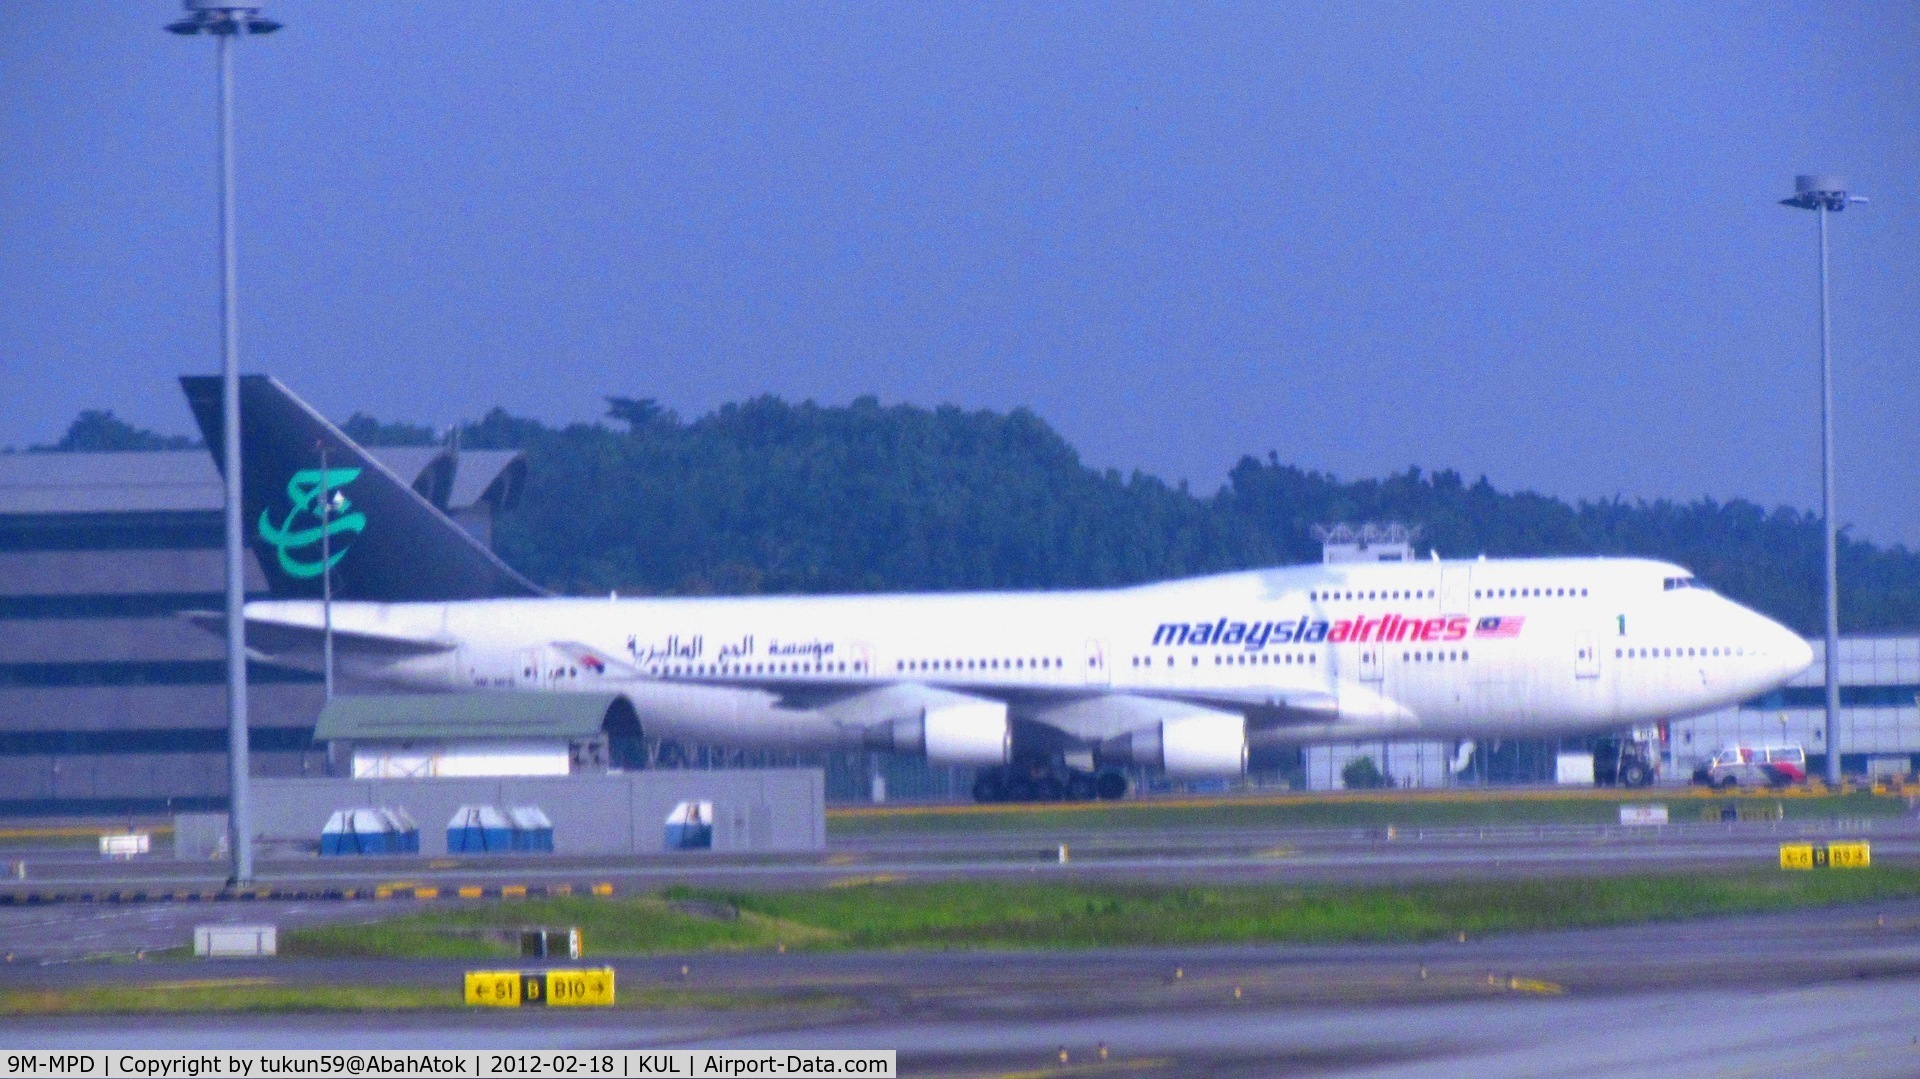 9M-MPD, 1993 Boeing 747-4H6 C/N 25701, Malaysia Airlines